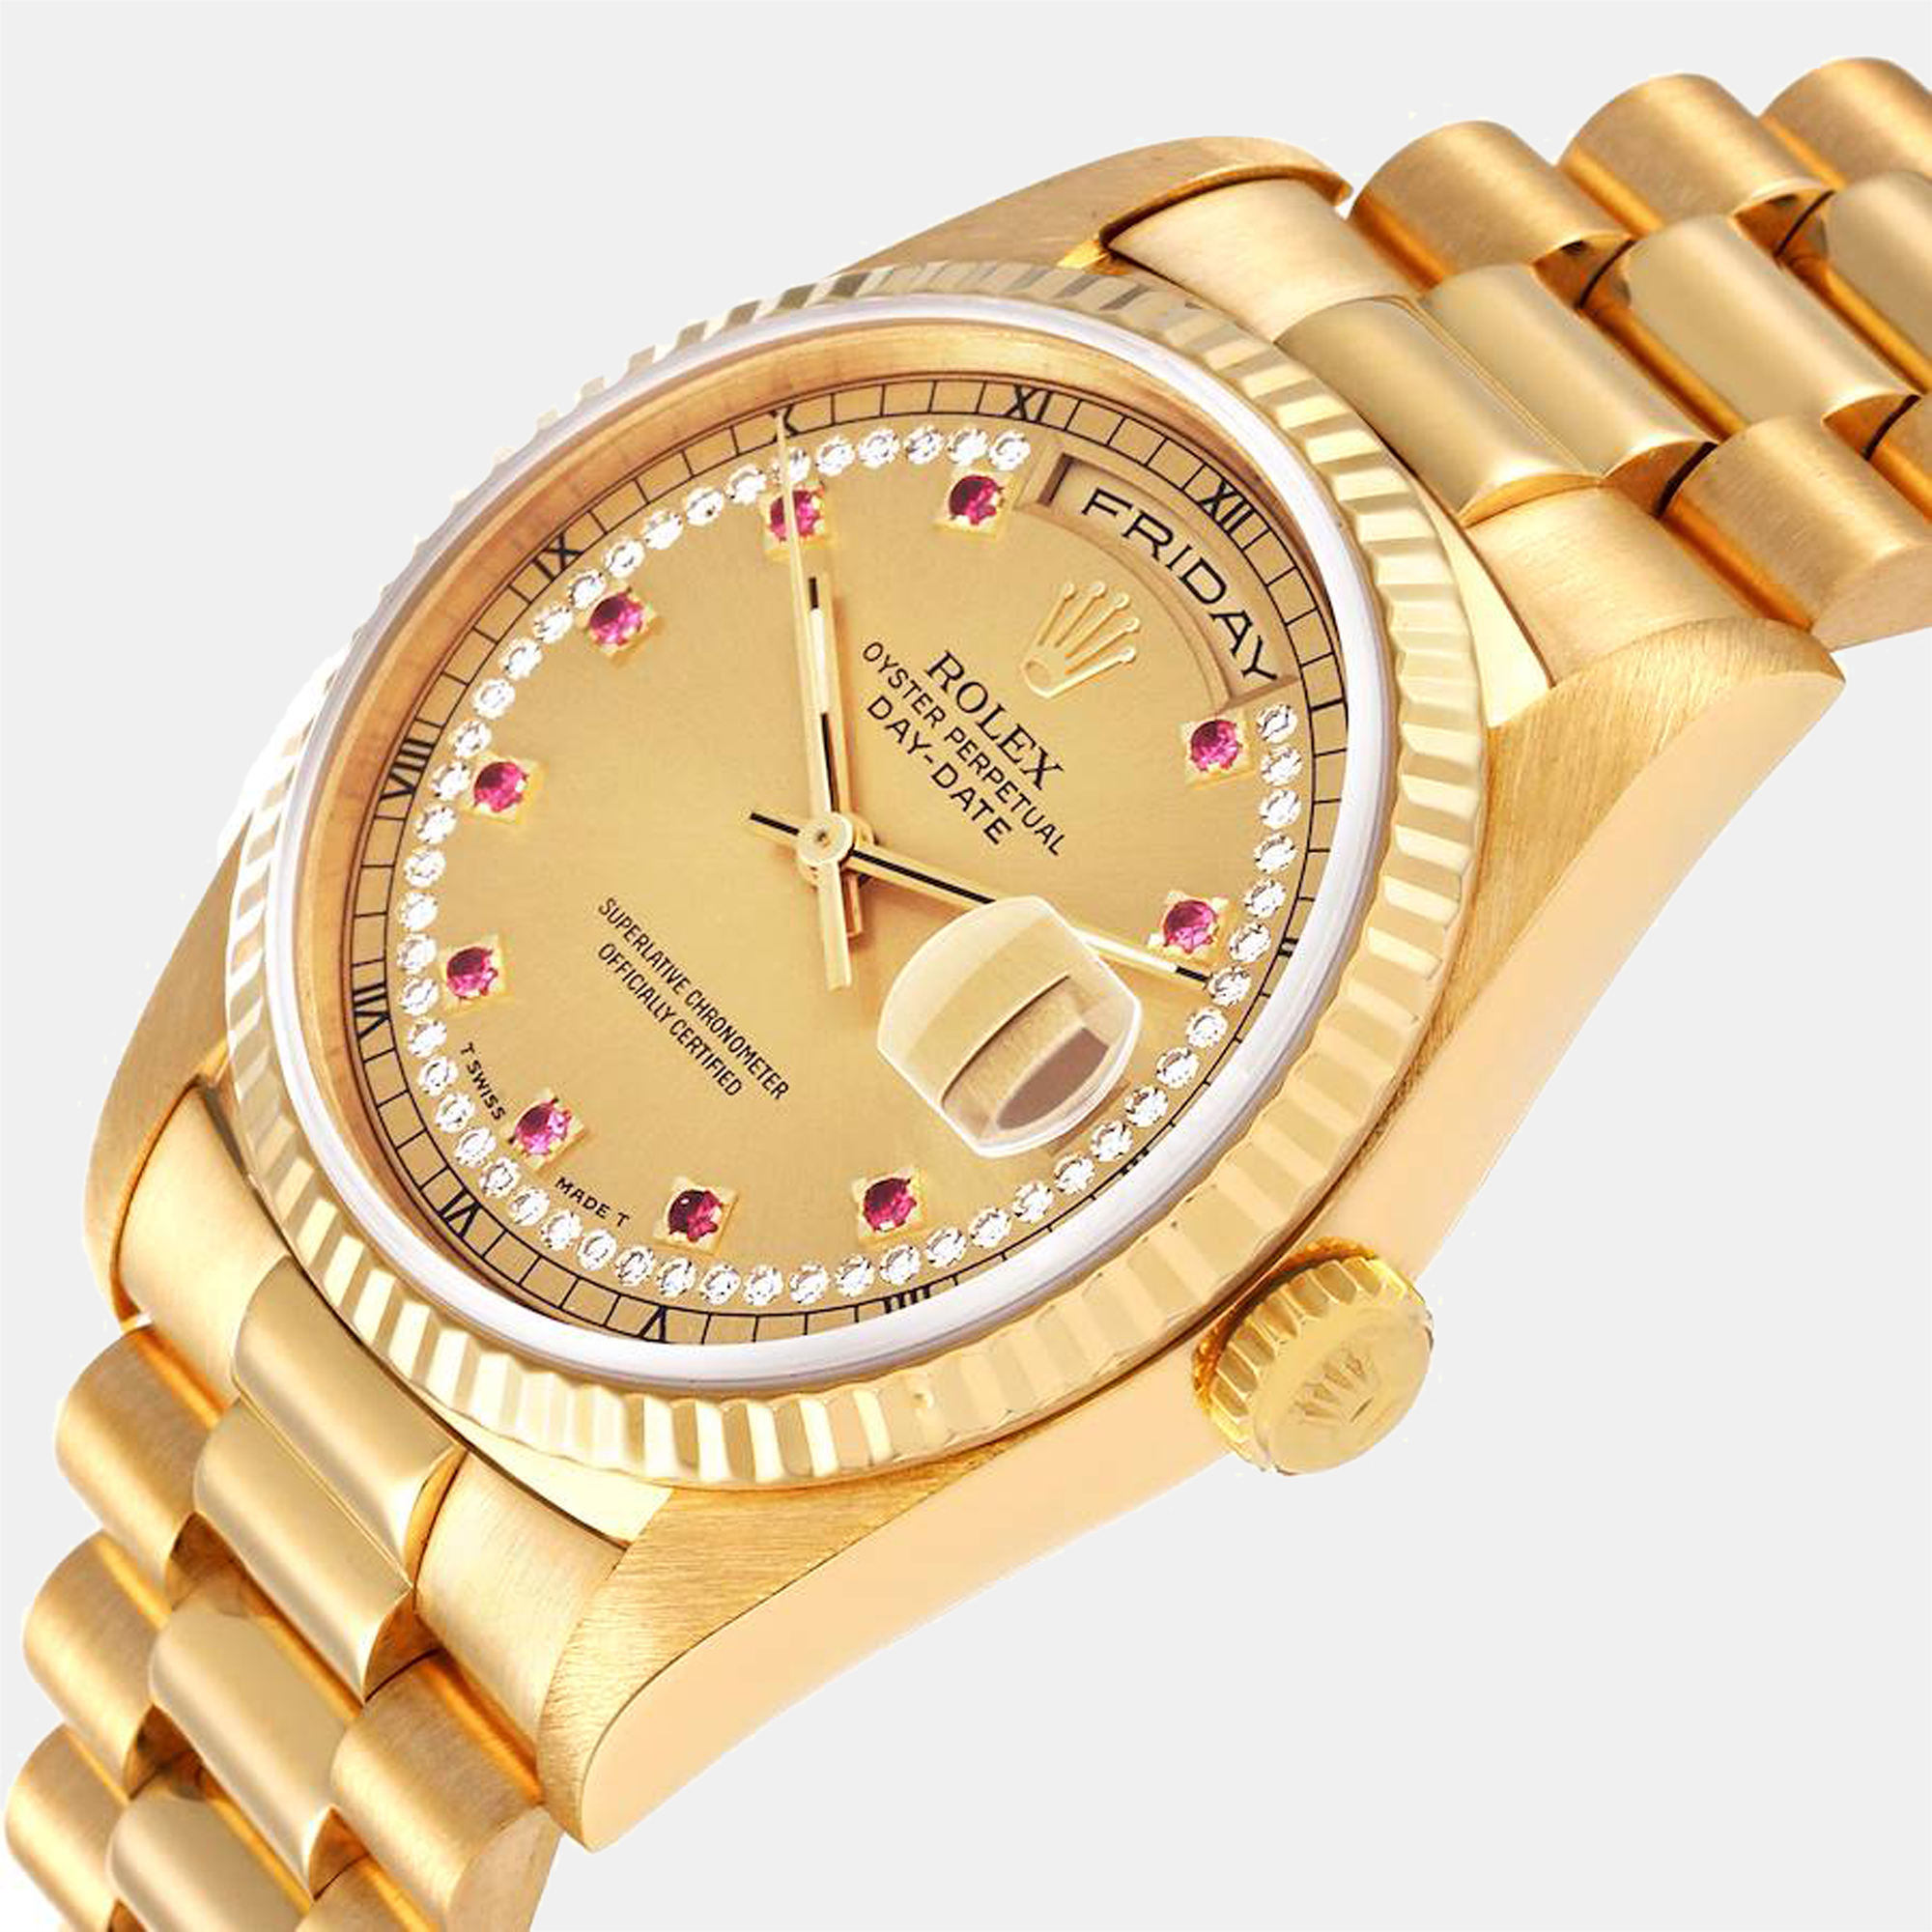 

Rolex Champagne Ruby And Diamonds 18K Yellow Gold President Day-Date 18238 Automatic Men's Wristwatch 36 mm